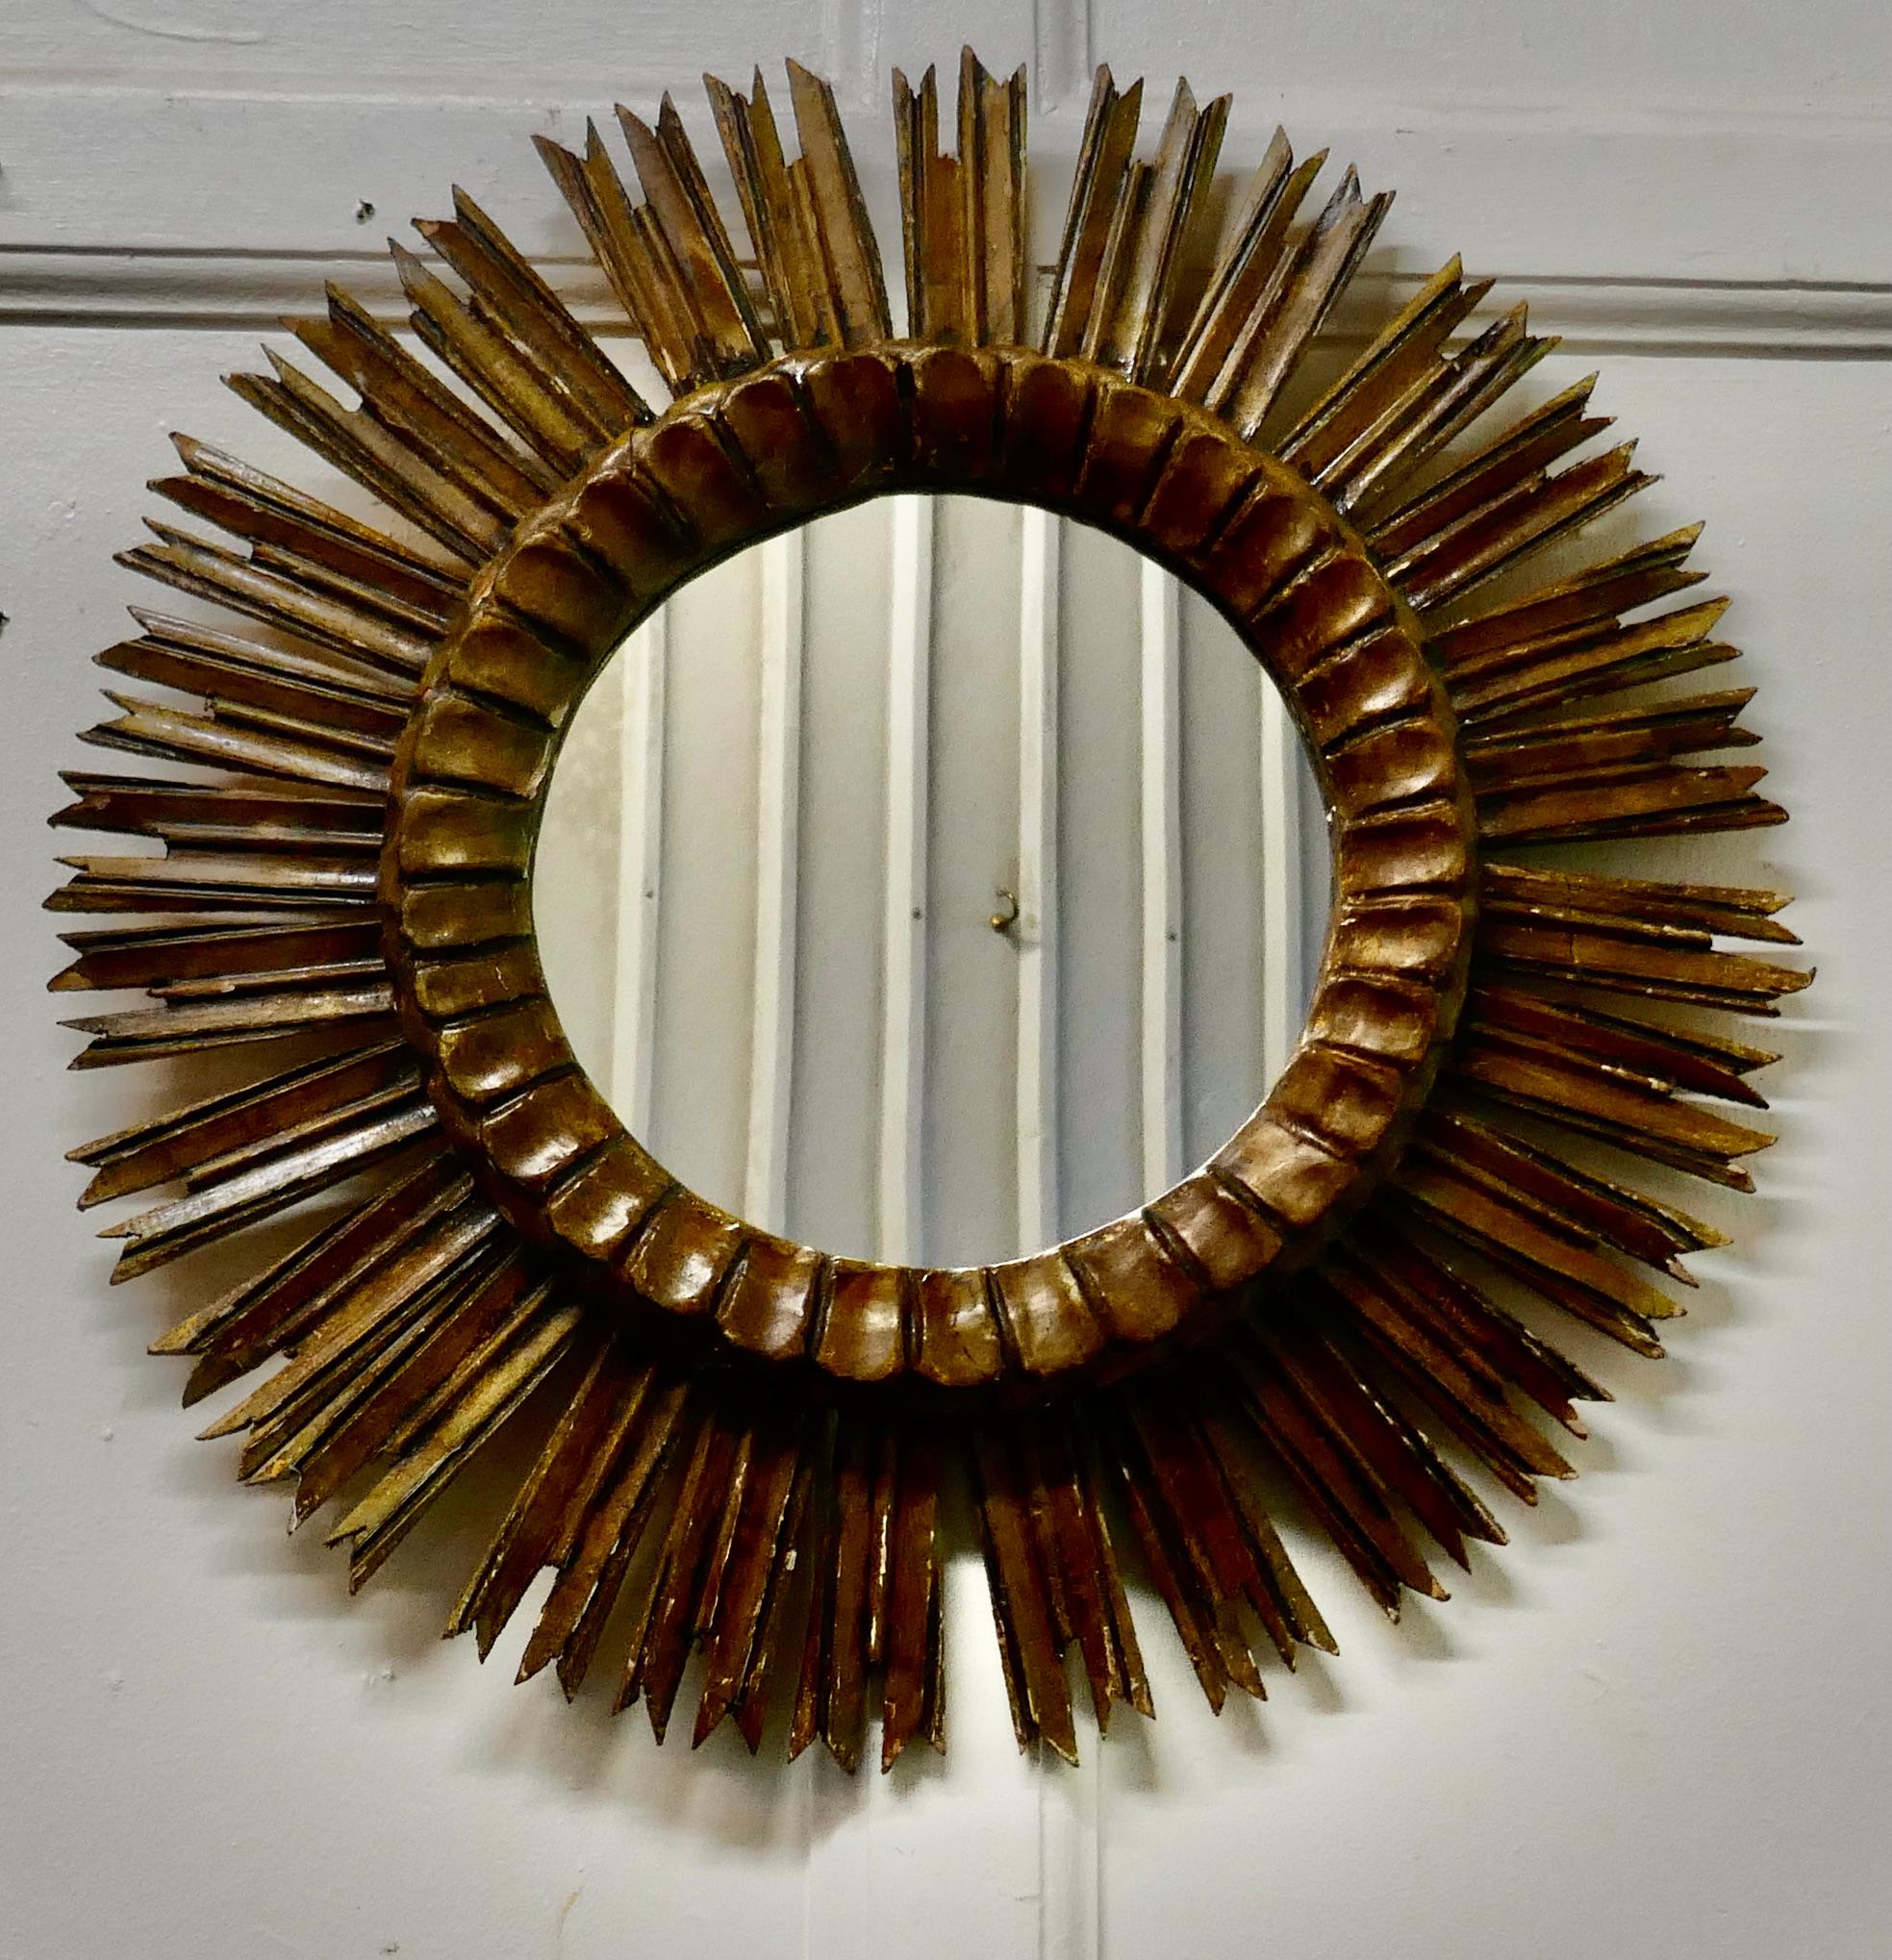 French Carved Wood Art Deco Odeon Style Sunburst Mirror

A Classic from the1920s, a classic and an original statement piece
A Superb piece, the sunburst radiates out from the central mirror, the giltwood rays are all hand carved
This is a